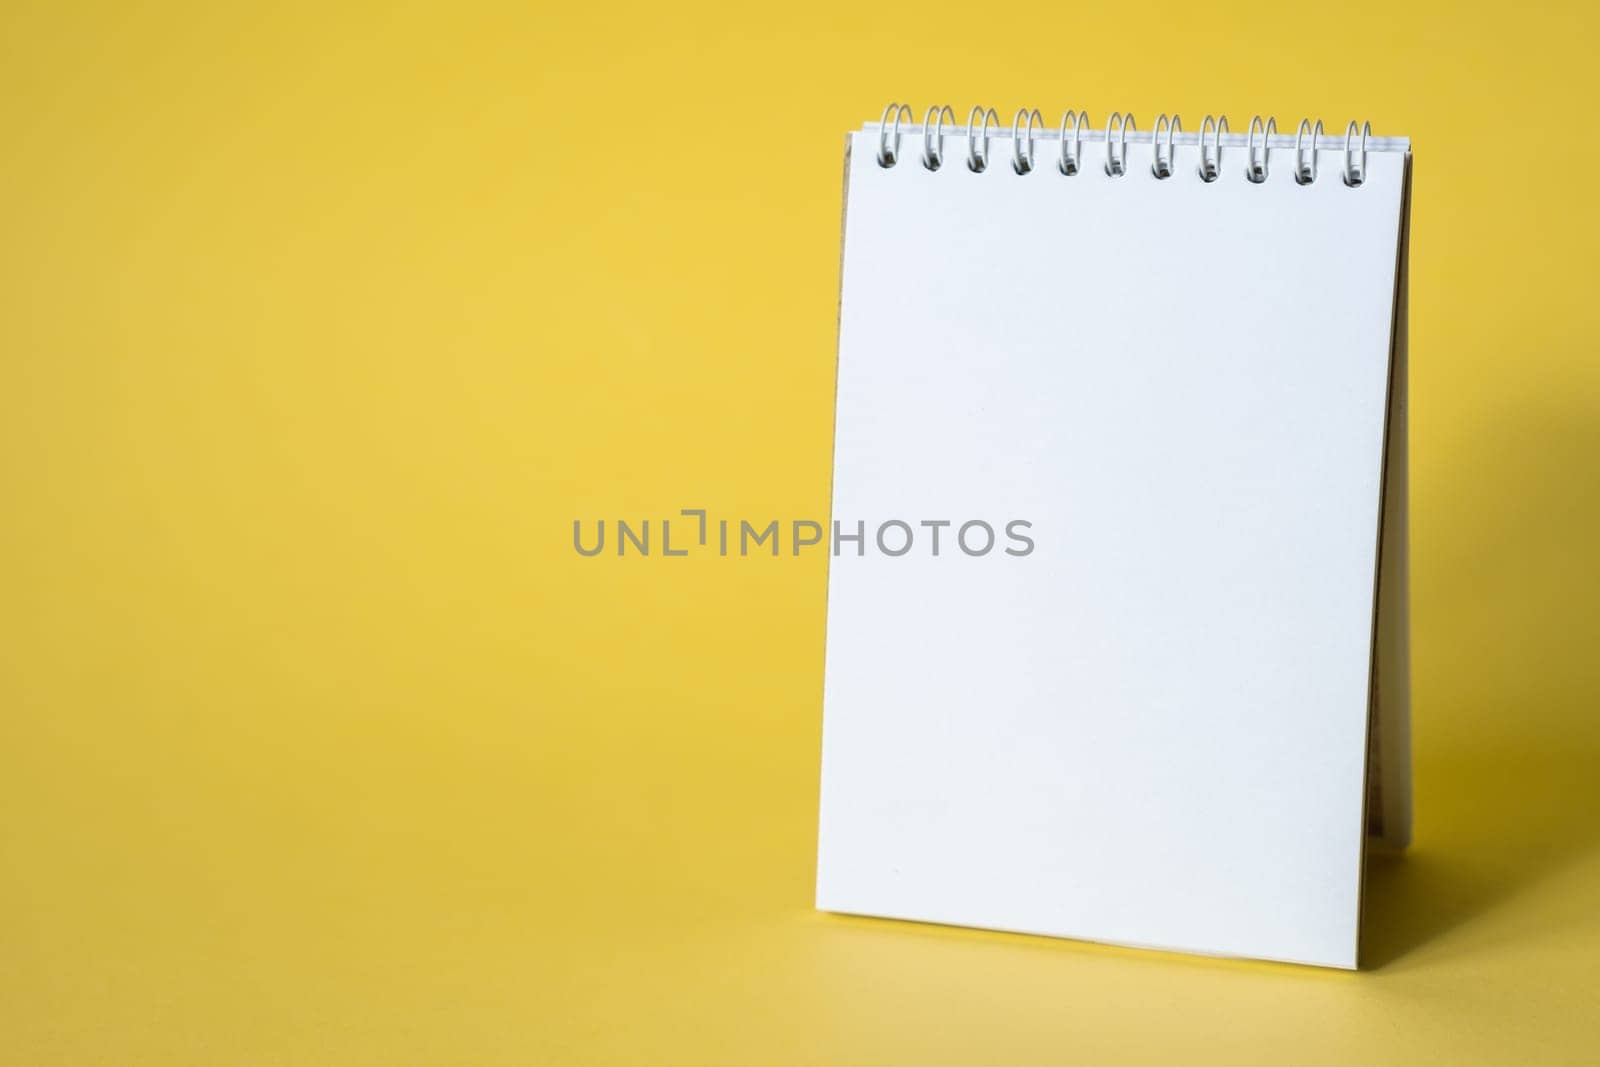 Opened notepad on a yellow background. Composition of writing to-dos for the day. The notebook lies on a plain background with space for writing.